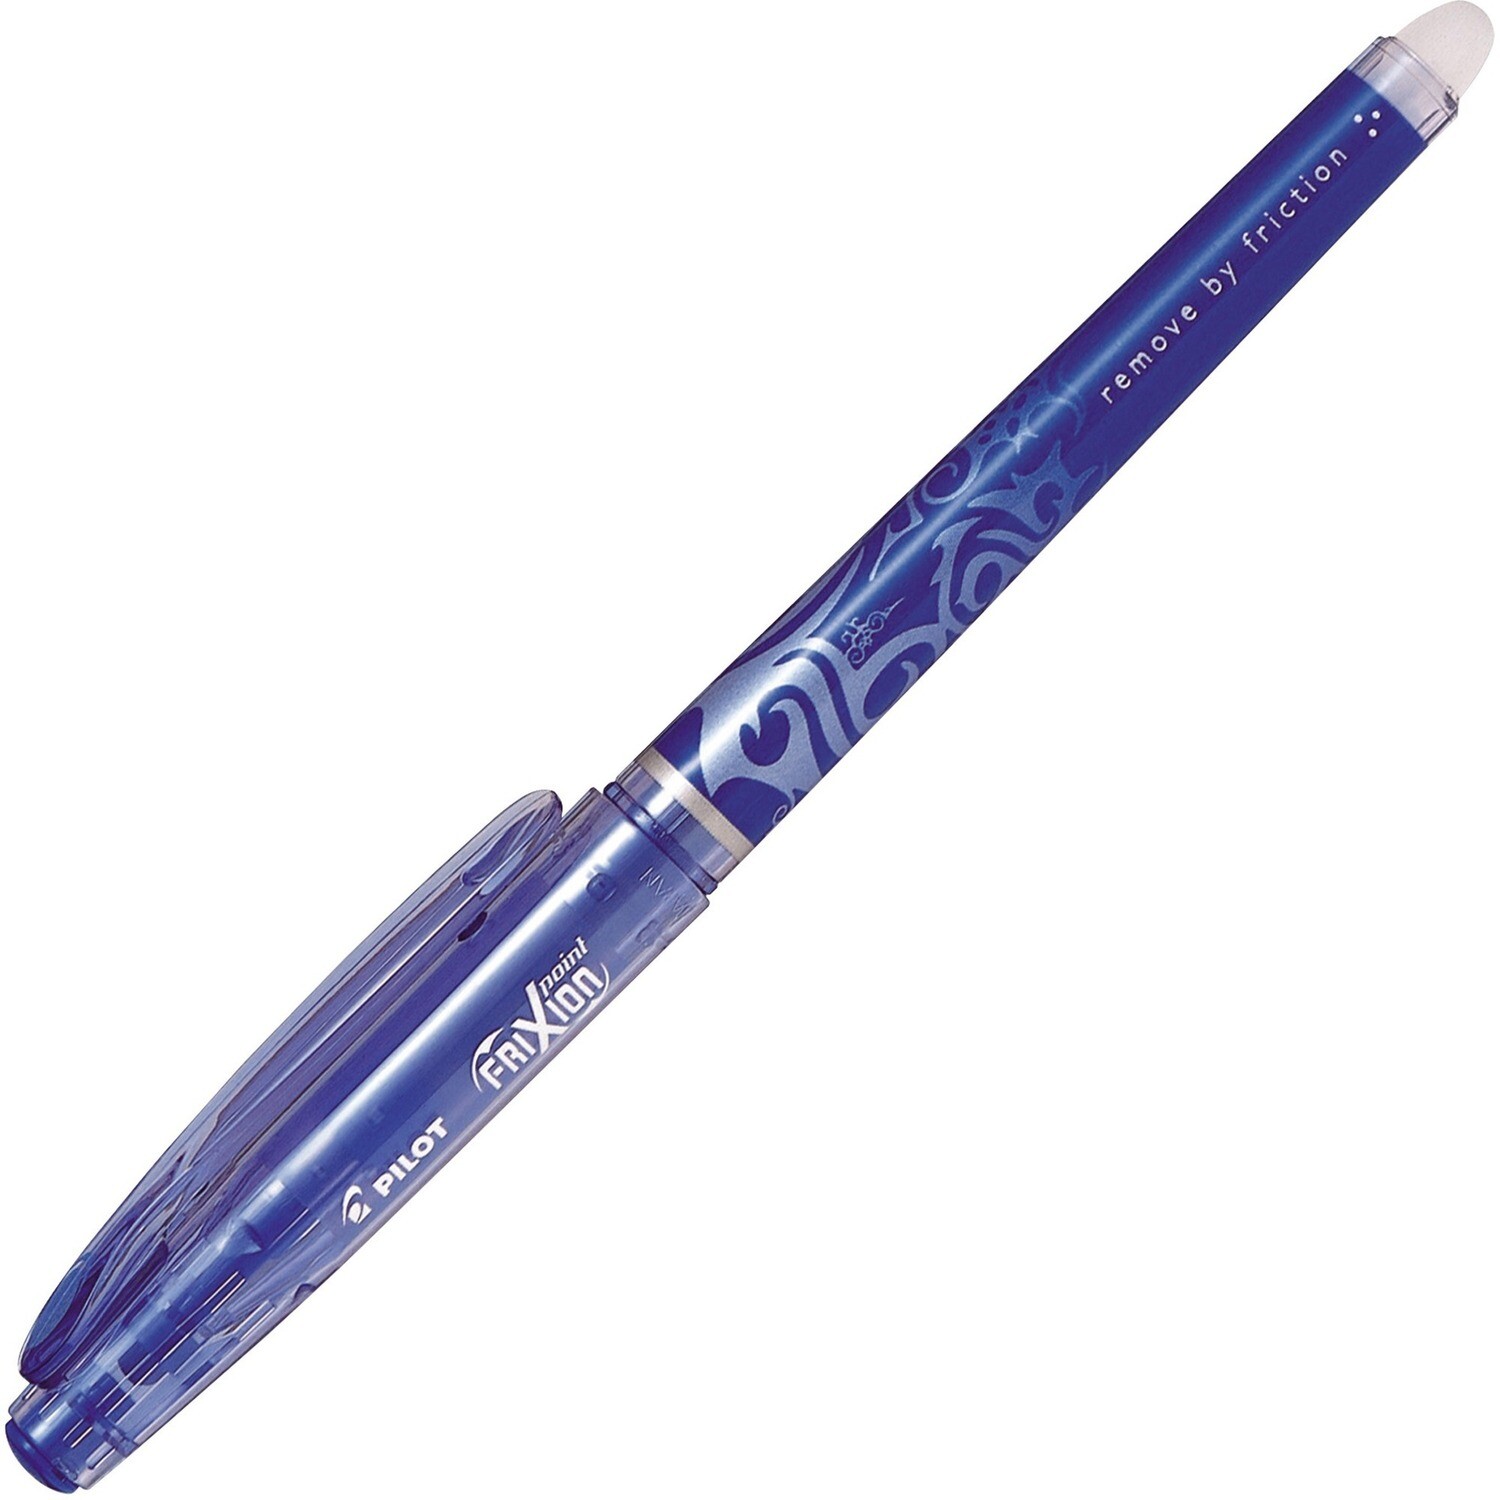 Pen, Erasable, Gel Rollerball, FriXion Blue, Box of 12, 0.5 Mm, Refillable